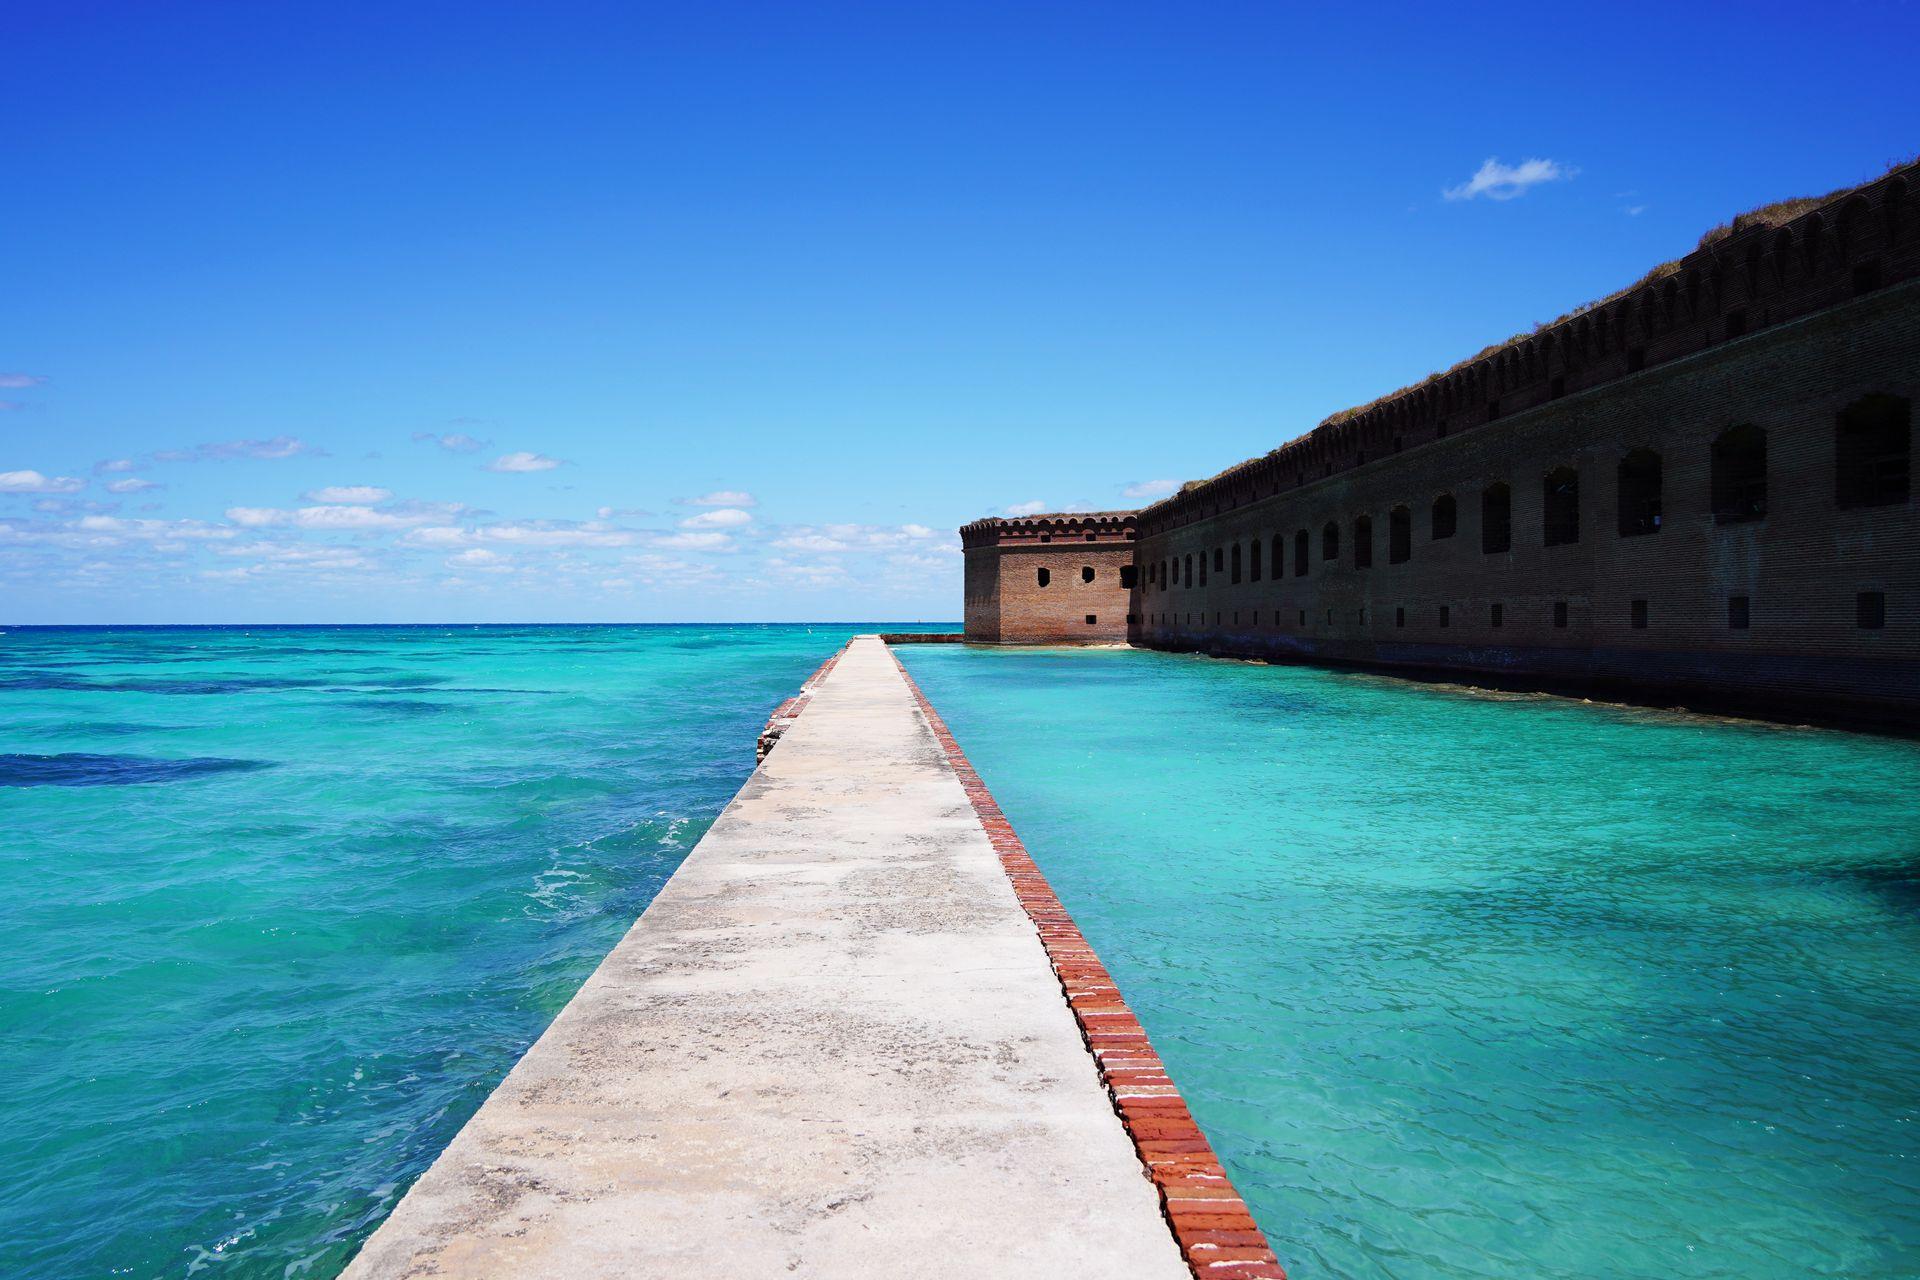 A narrow path surrounding by water on both sides with an old military fort in the background at Dry Tortugas National Park